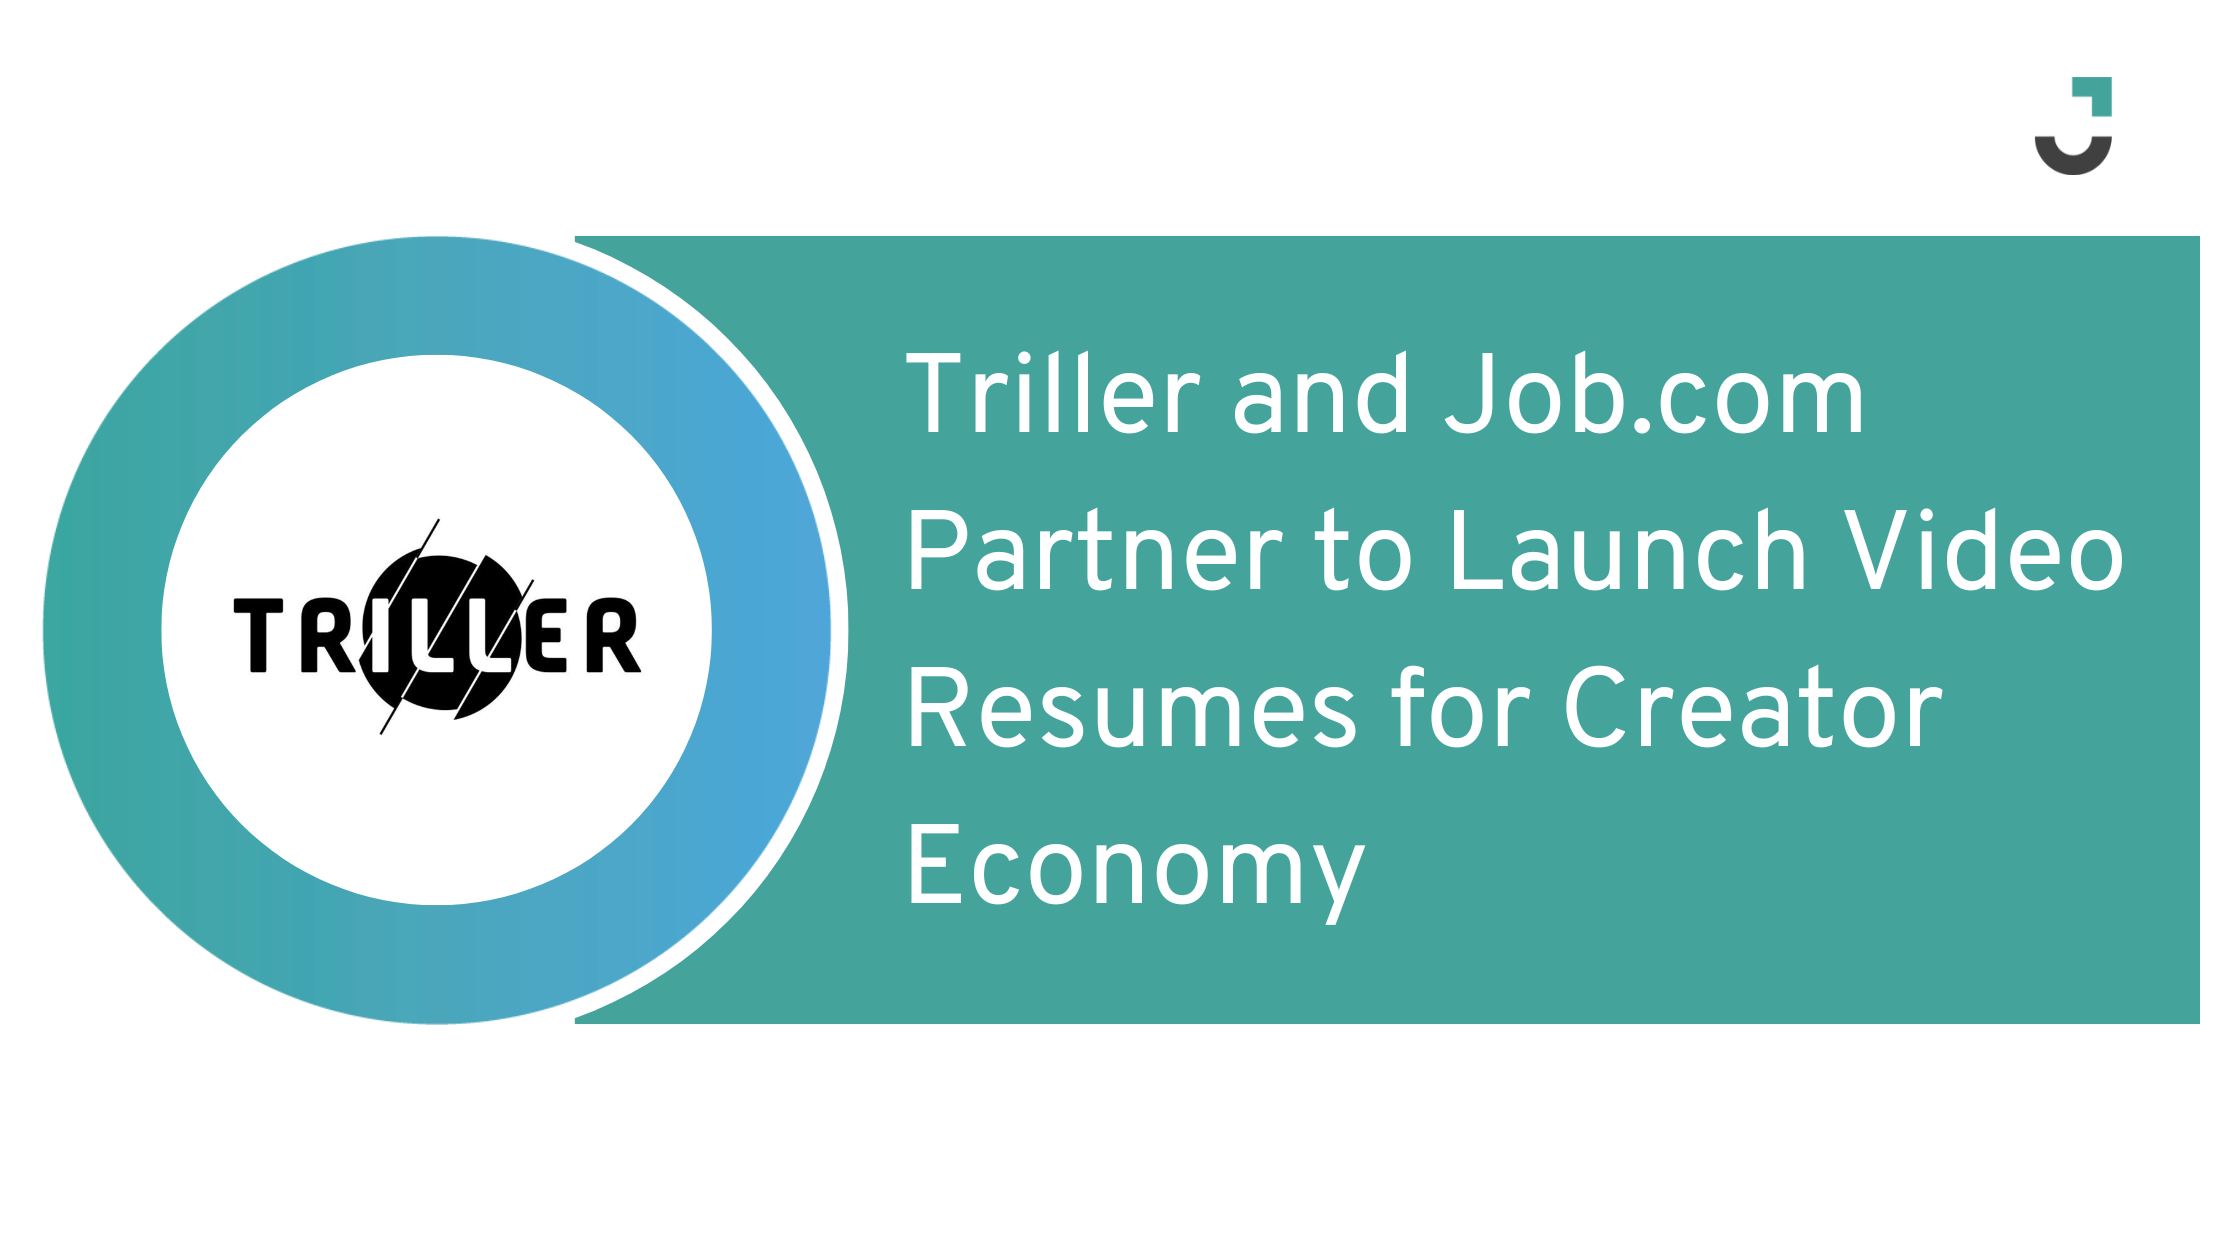 Triller and Job.com Partner to Launch Video Resumes for Creator Economy